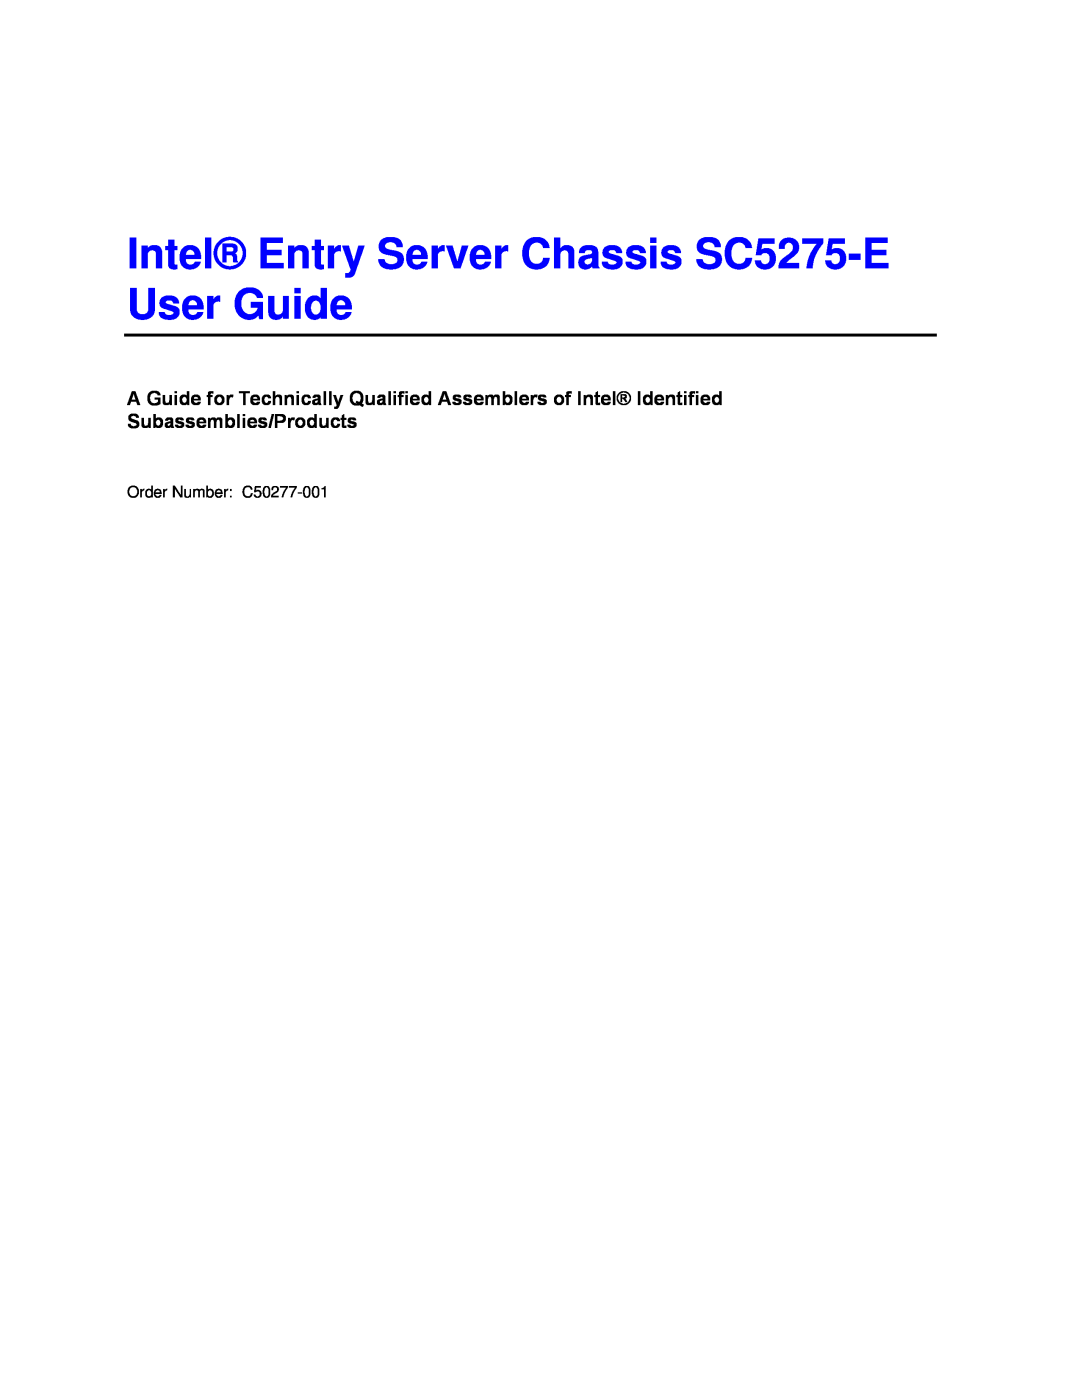 Intel manual Intel Entry Server Chassis SC5275-E User Guide, Order Number C50277-001 